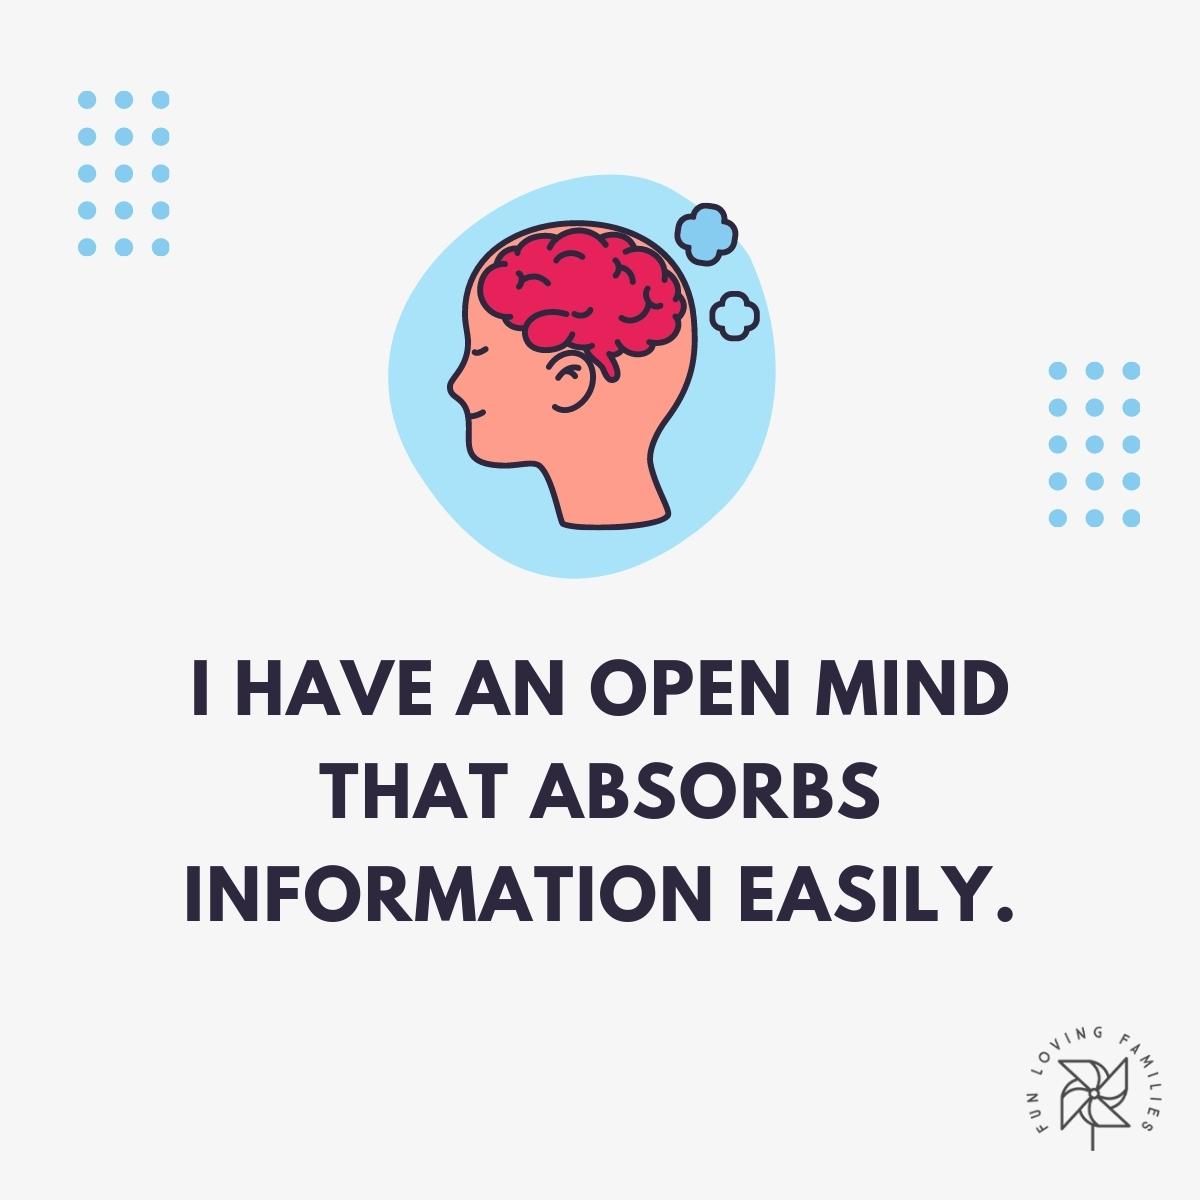 I have an open mind that absorbs information easily affirmation